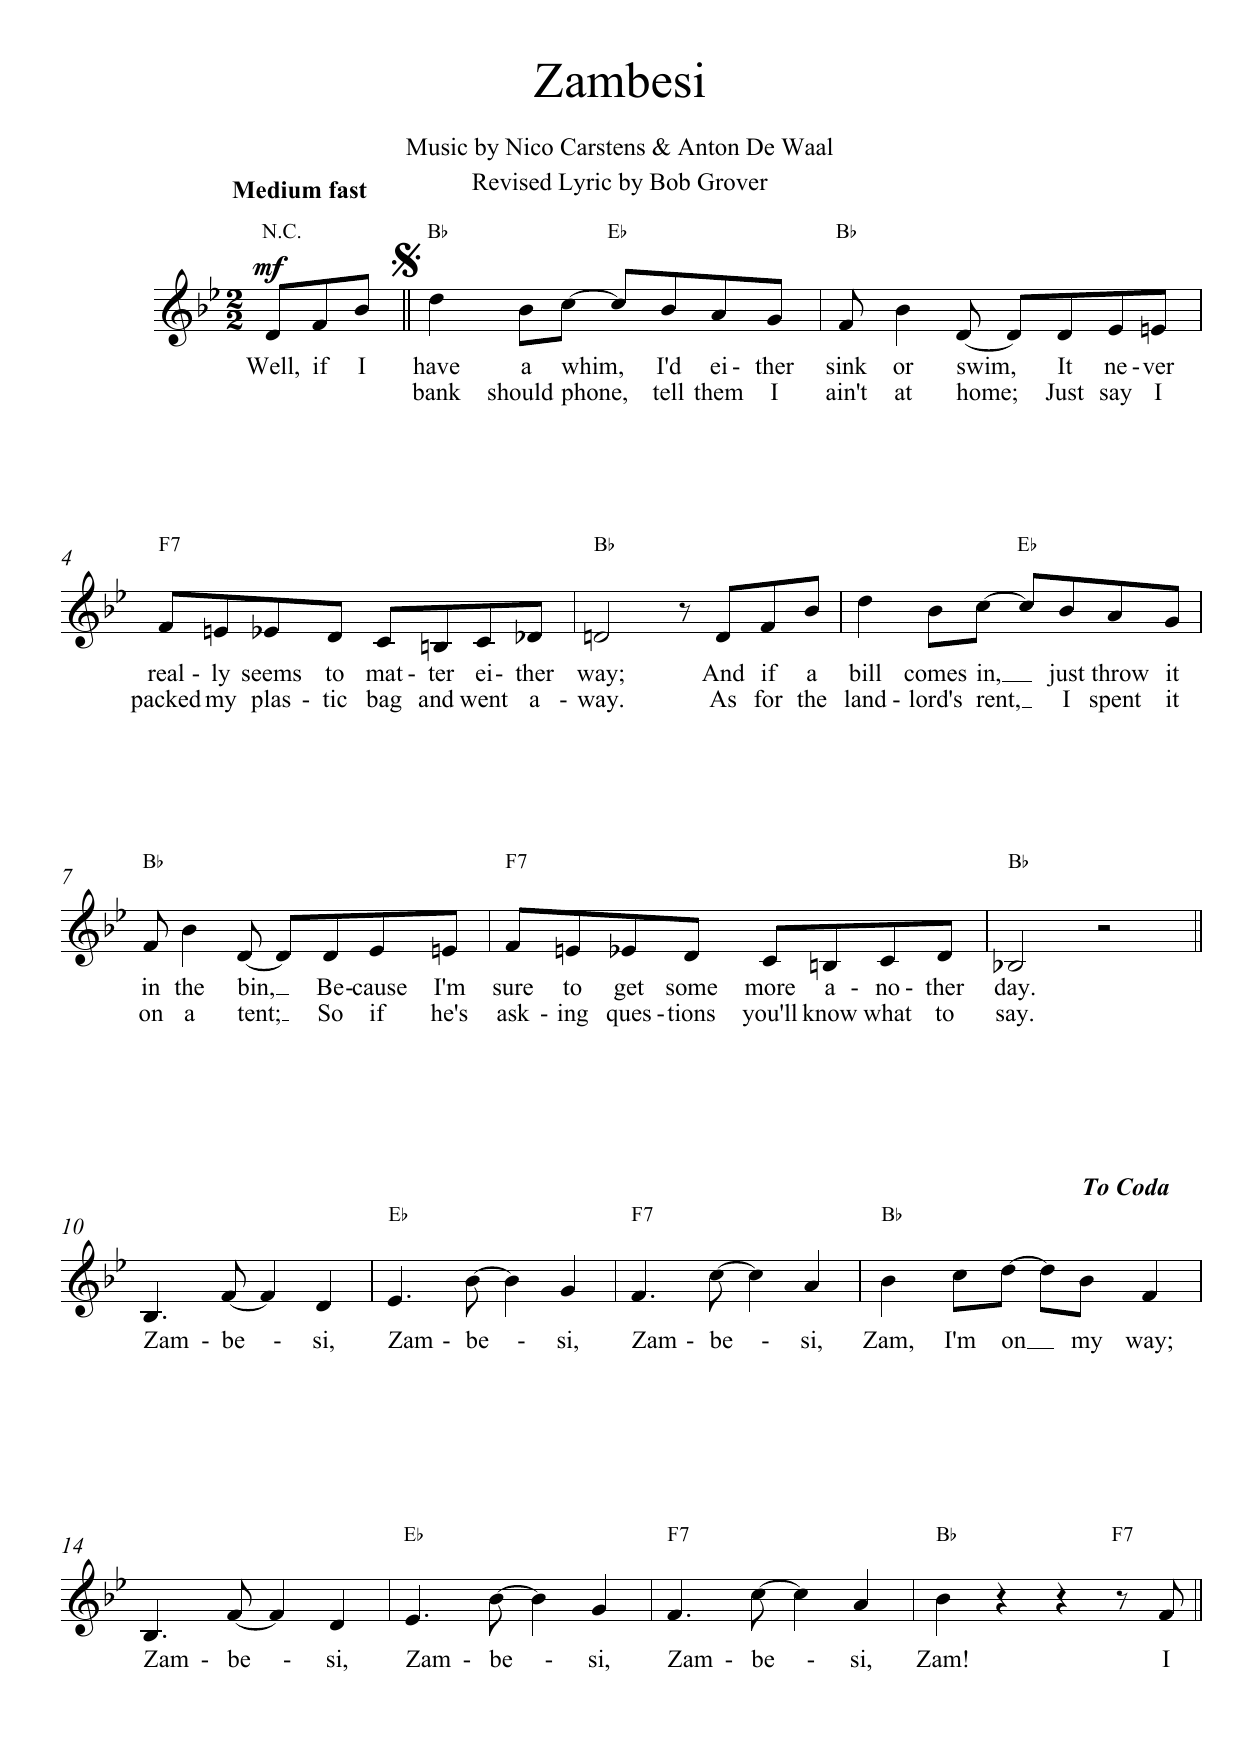 Nico Carstens Zambesi sheet music notes and chords. Download Printable PDF.